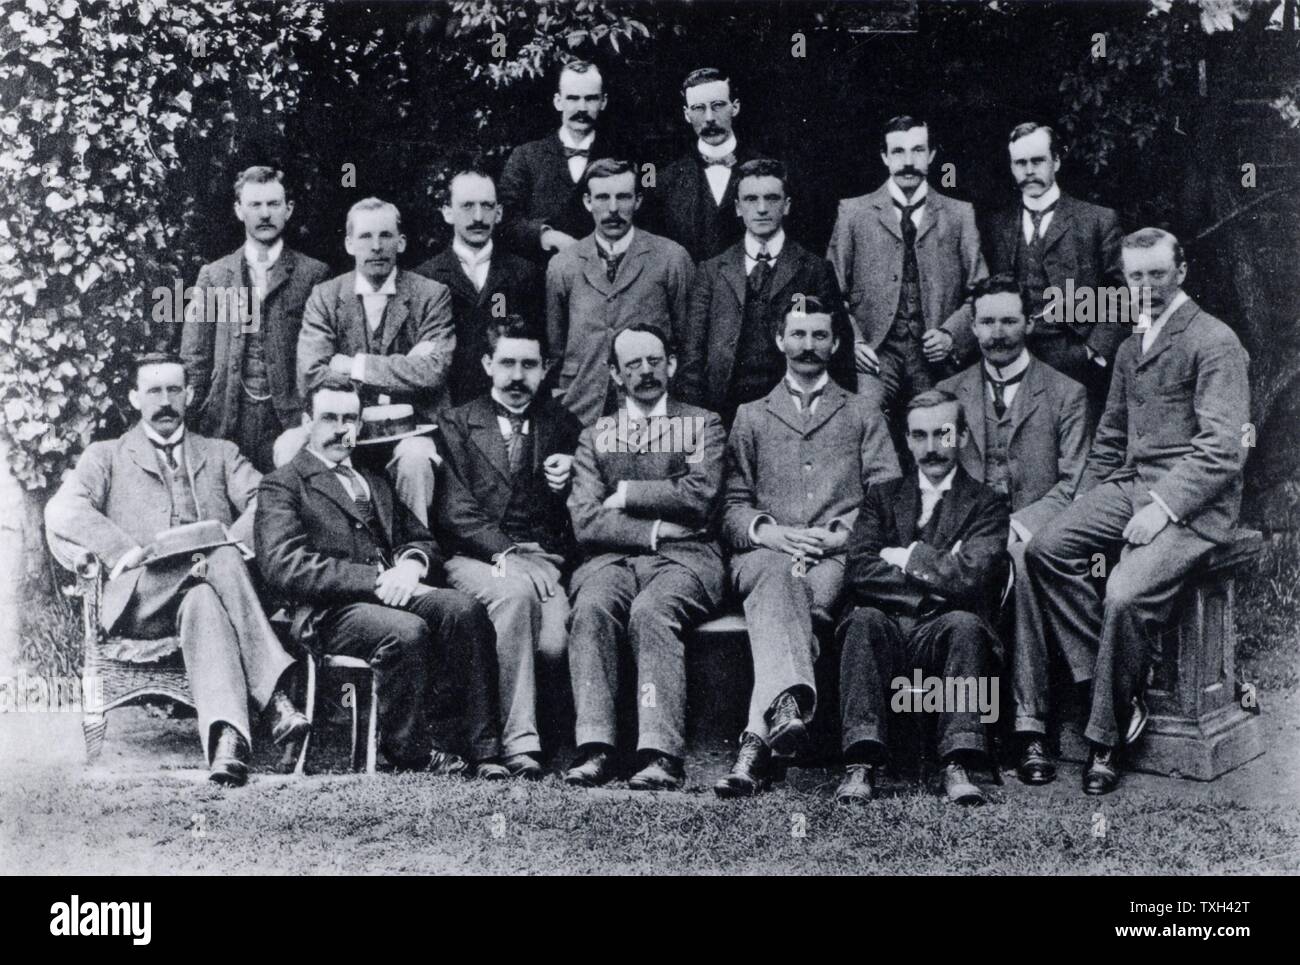 Cambridge - Cavendish Laboratory, England:  Research students in 1898 : Joseph John Thomson is in the centre of the front row with his arms crossed. In the middle row are Charles Thomson Rees Wilson and Ernest Rutherford , 3rd and 4th from left respectively.  From 'Recollections and Reflections' by JJ Thomson. Stock Photo